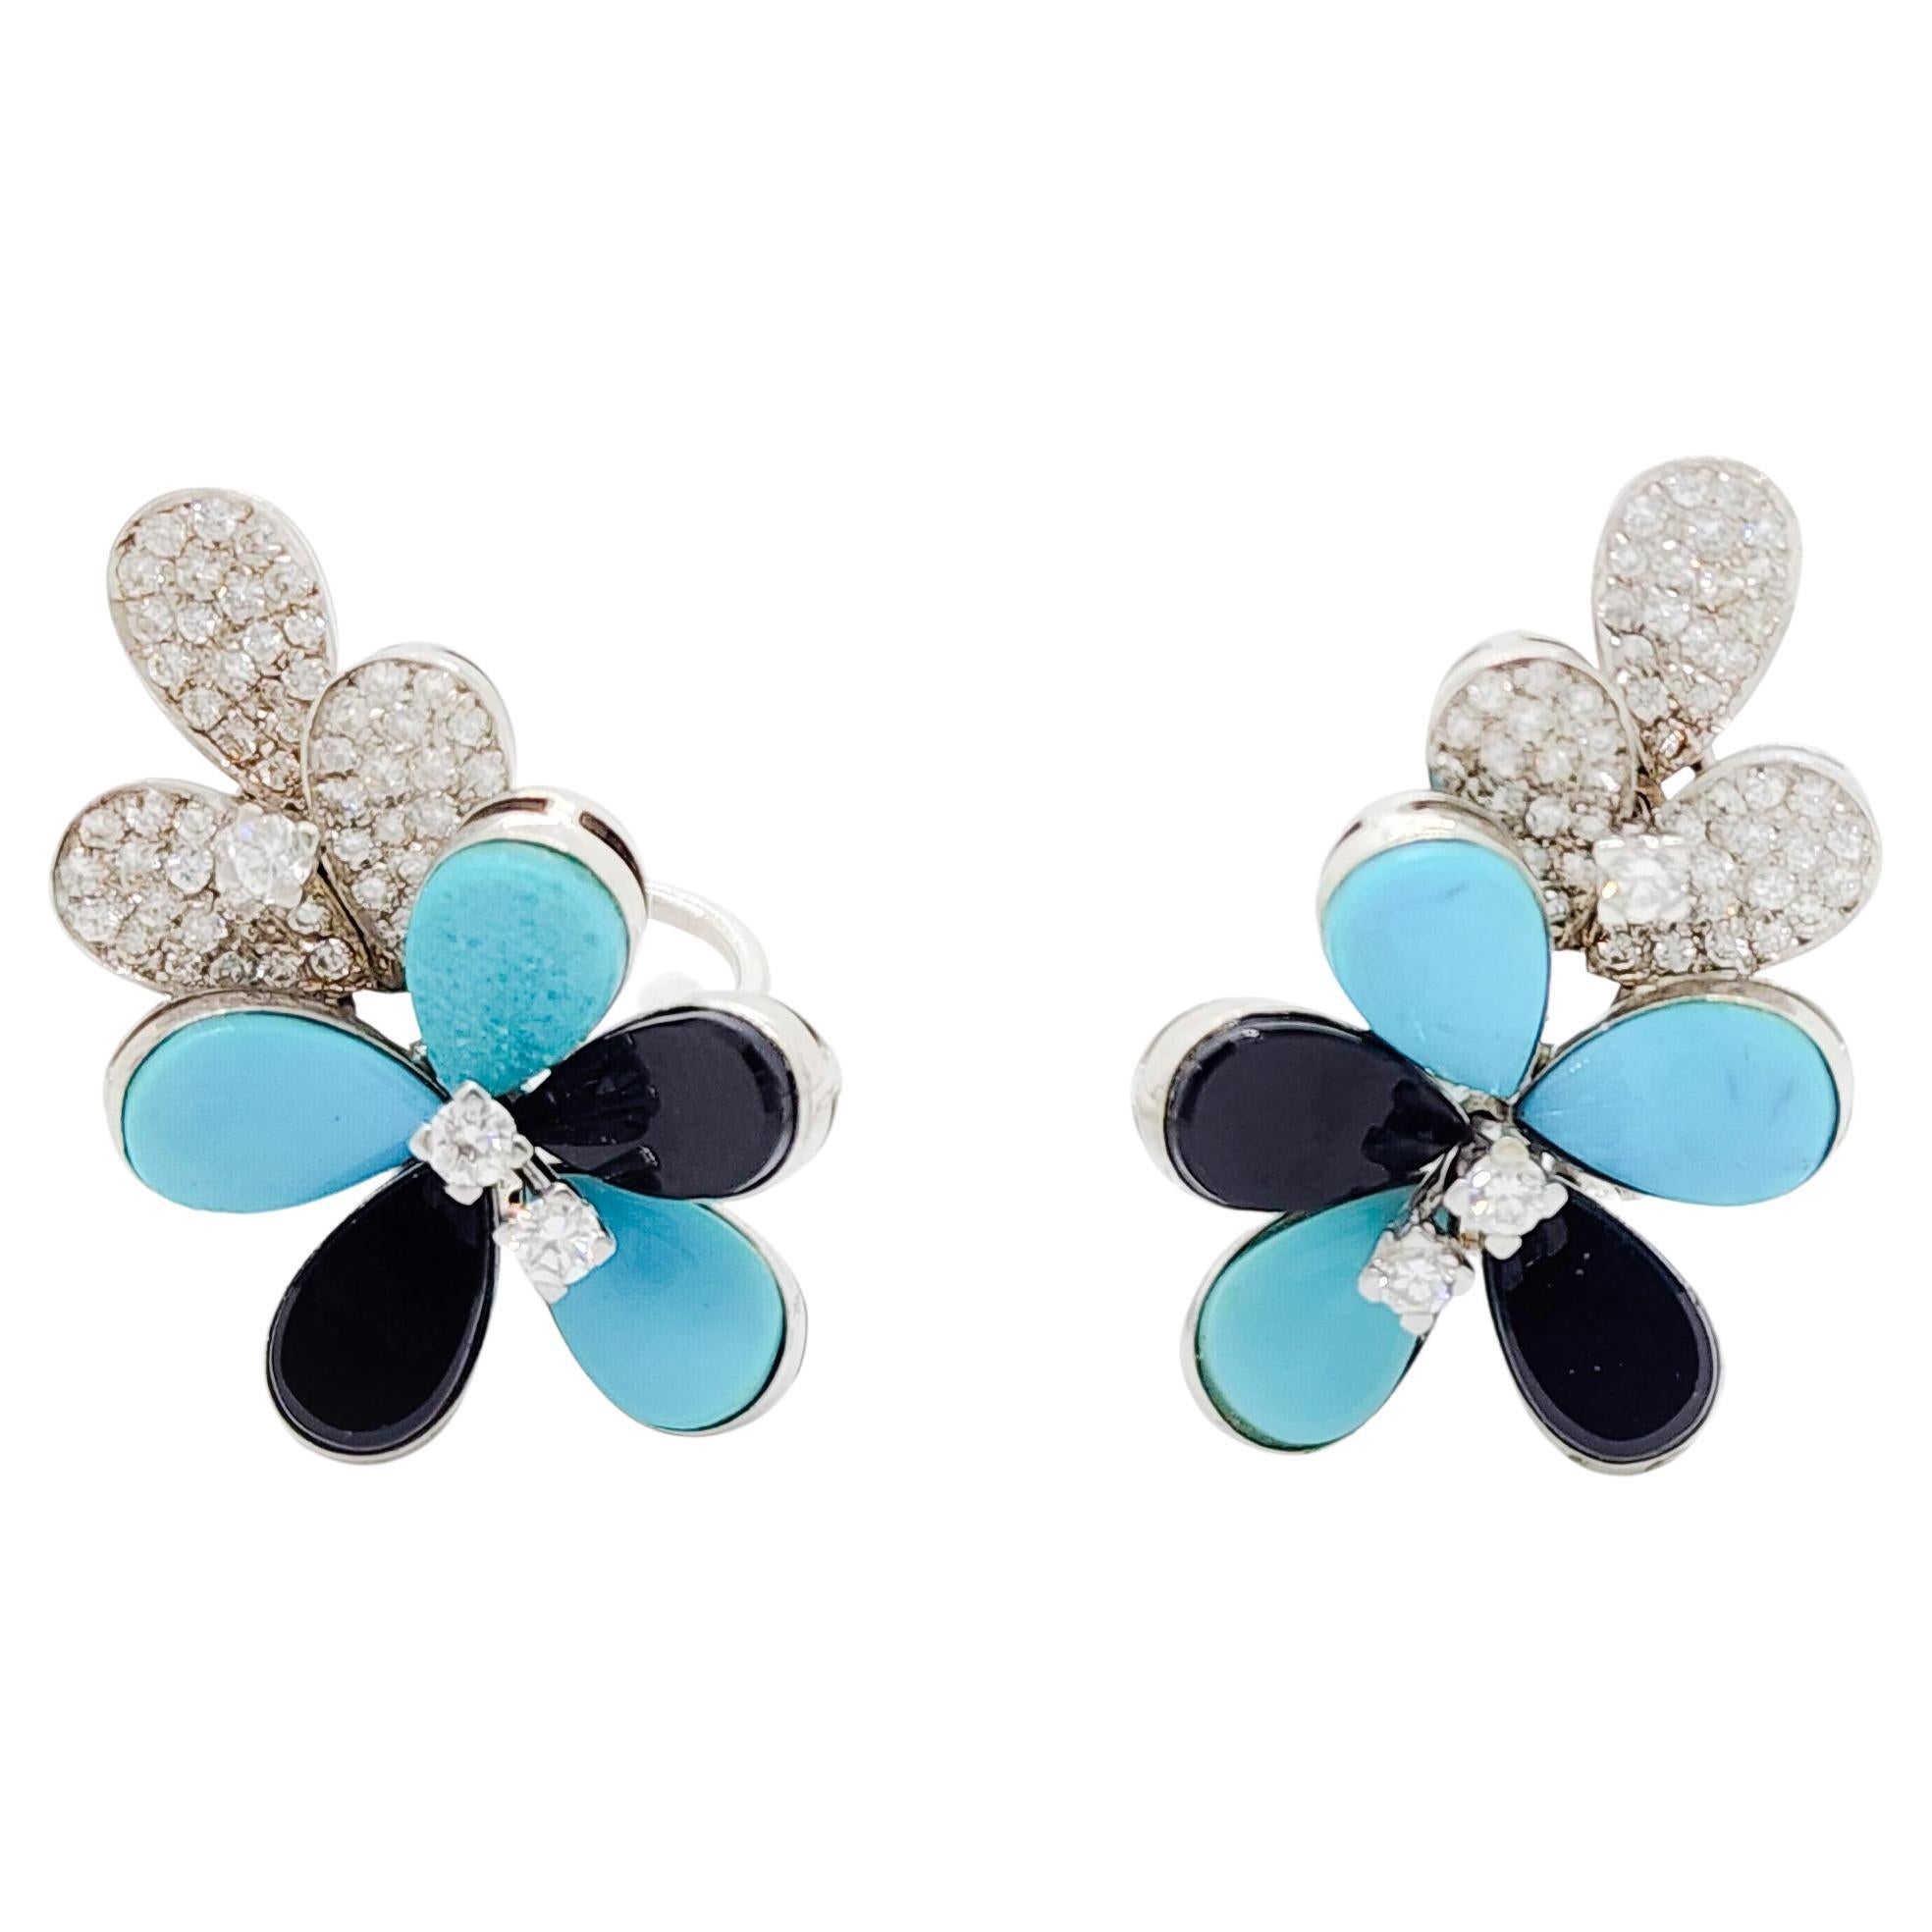 Turquoise and White Diamond Floral Cluster Earrings in 18k